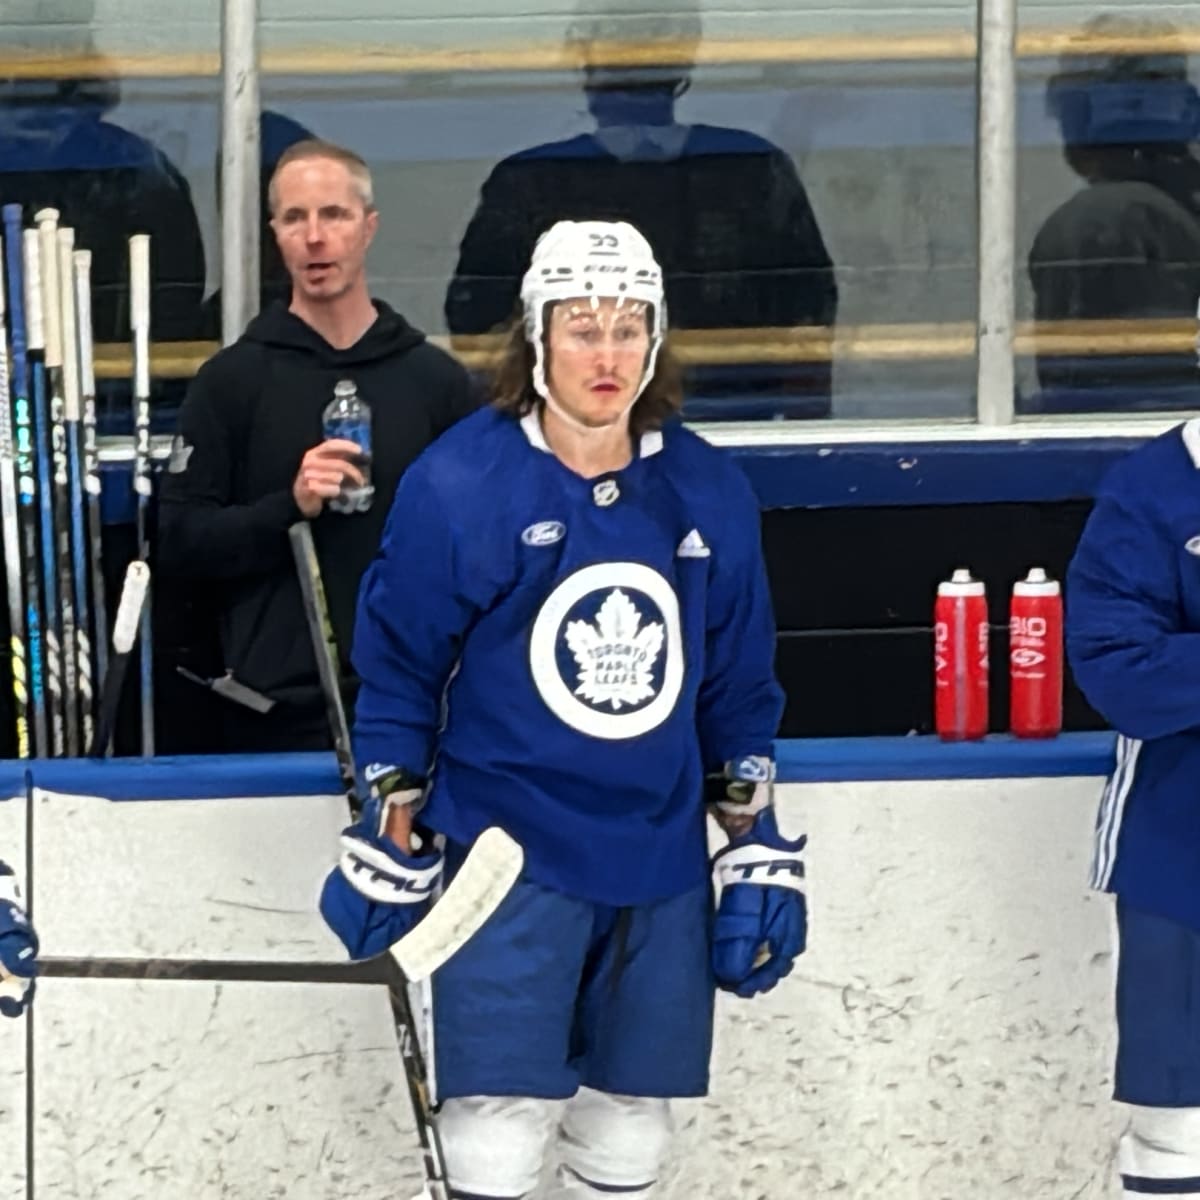 Tyler Bertuzzi could be missing ingredient to power Leafs top line